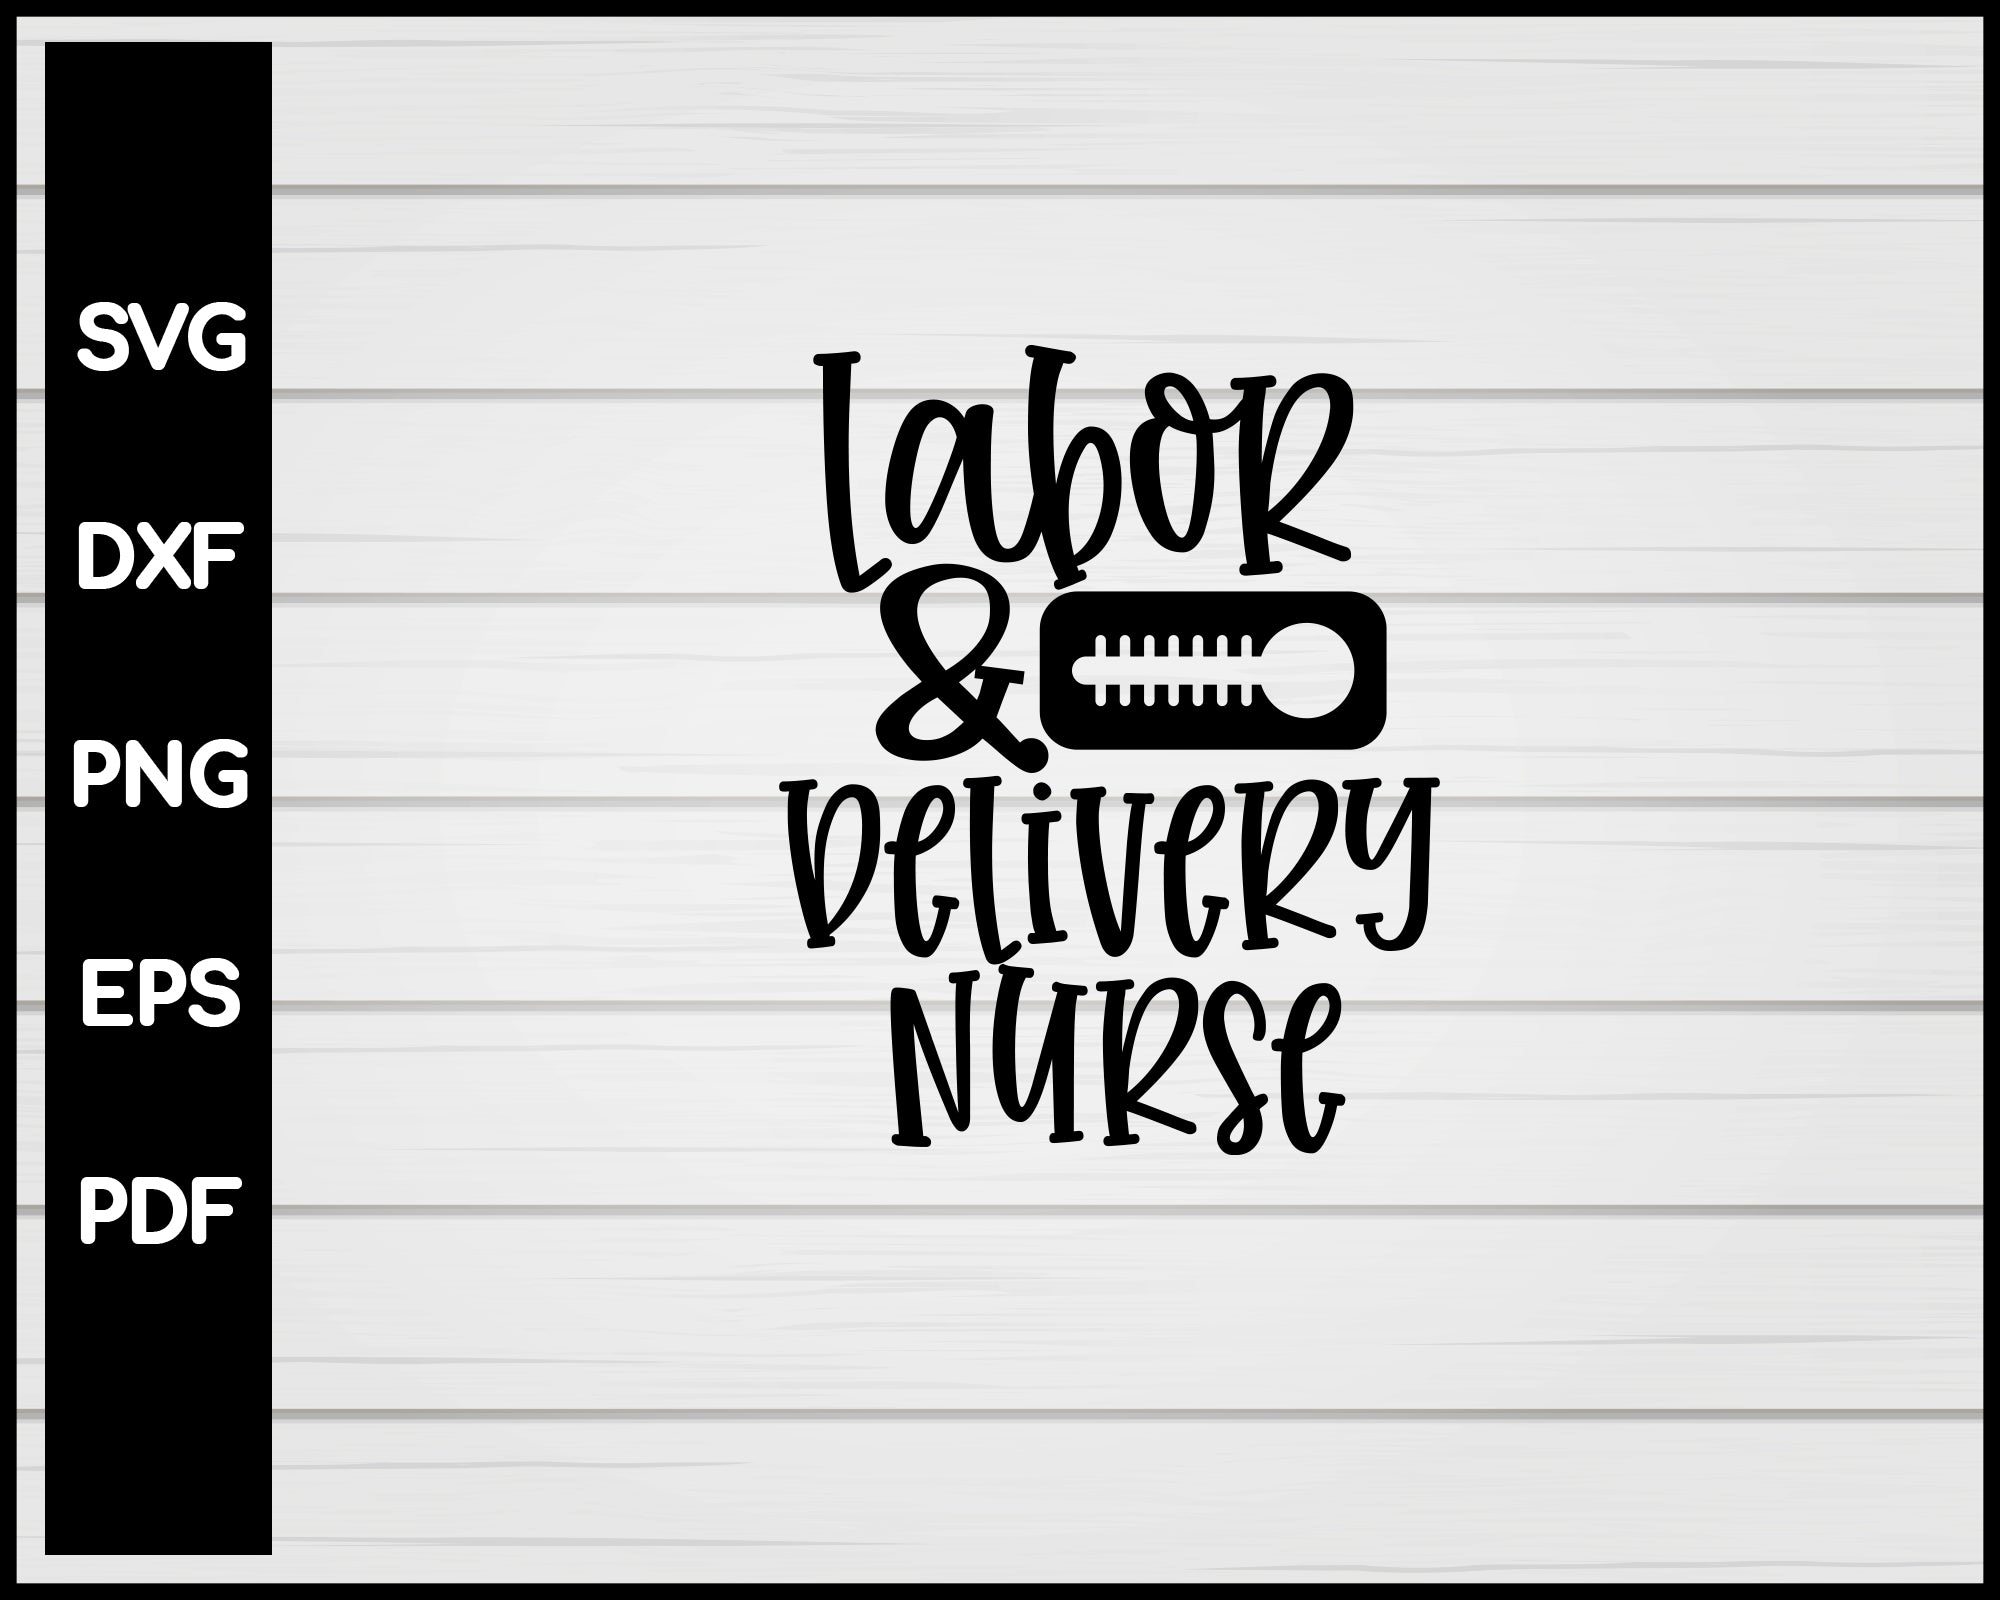 Labor & Belivery Nurse svg Cut File For Cricut Silhouette eps png dxf Printable Files